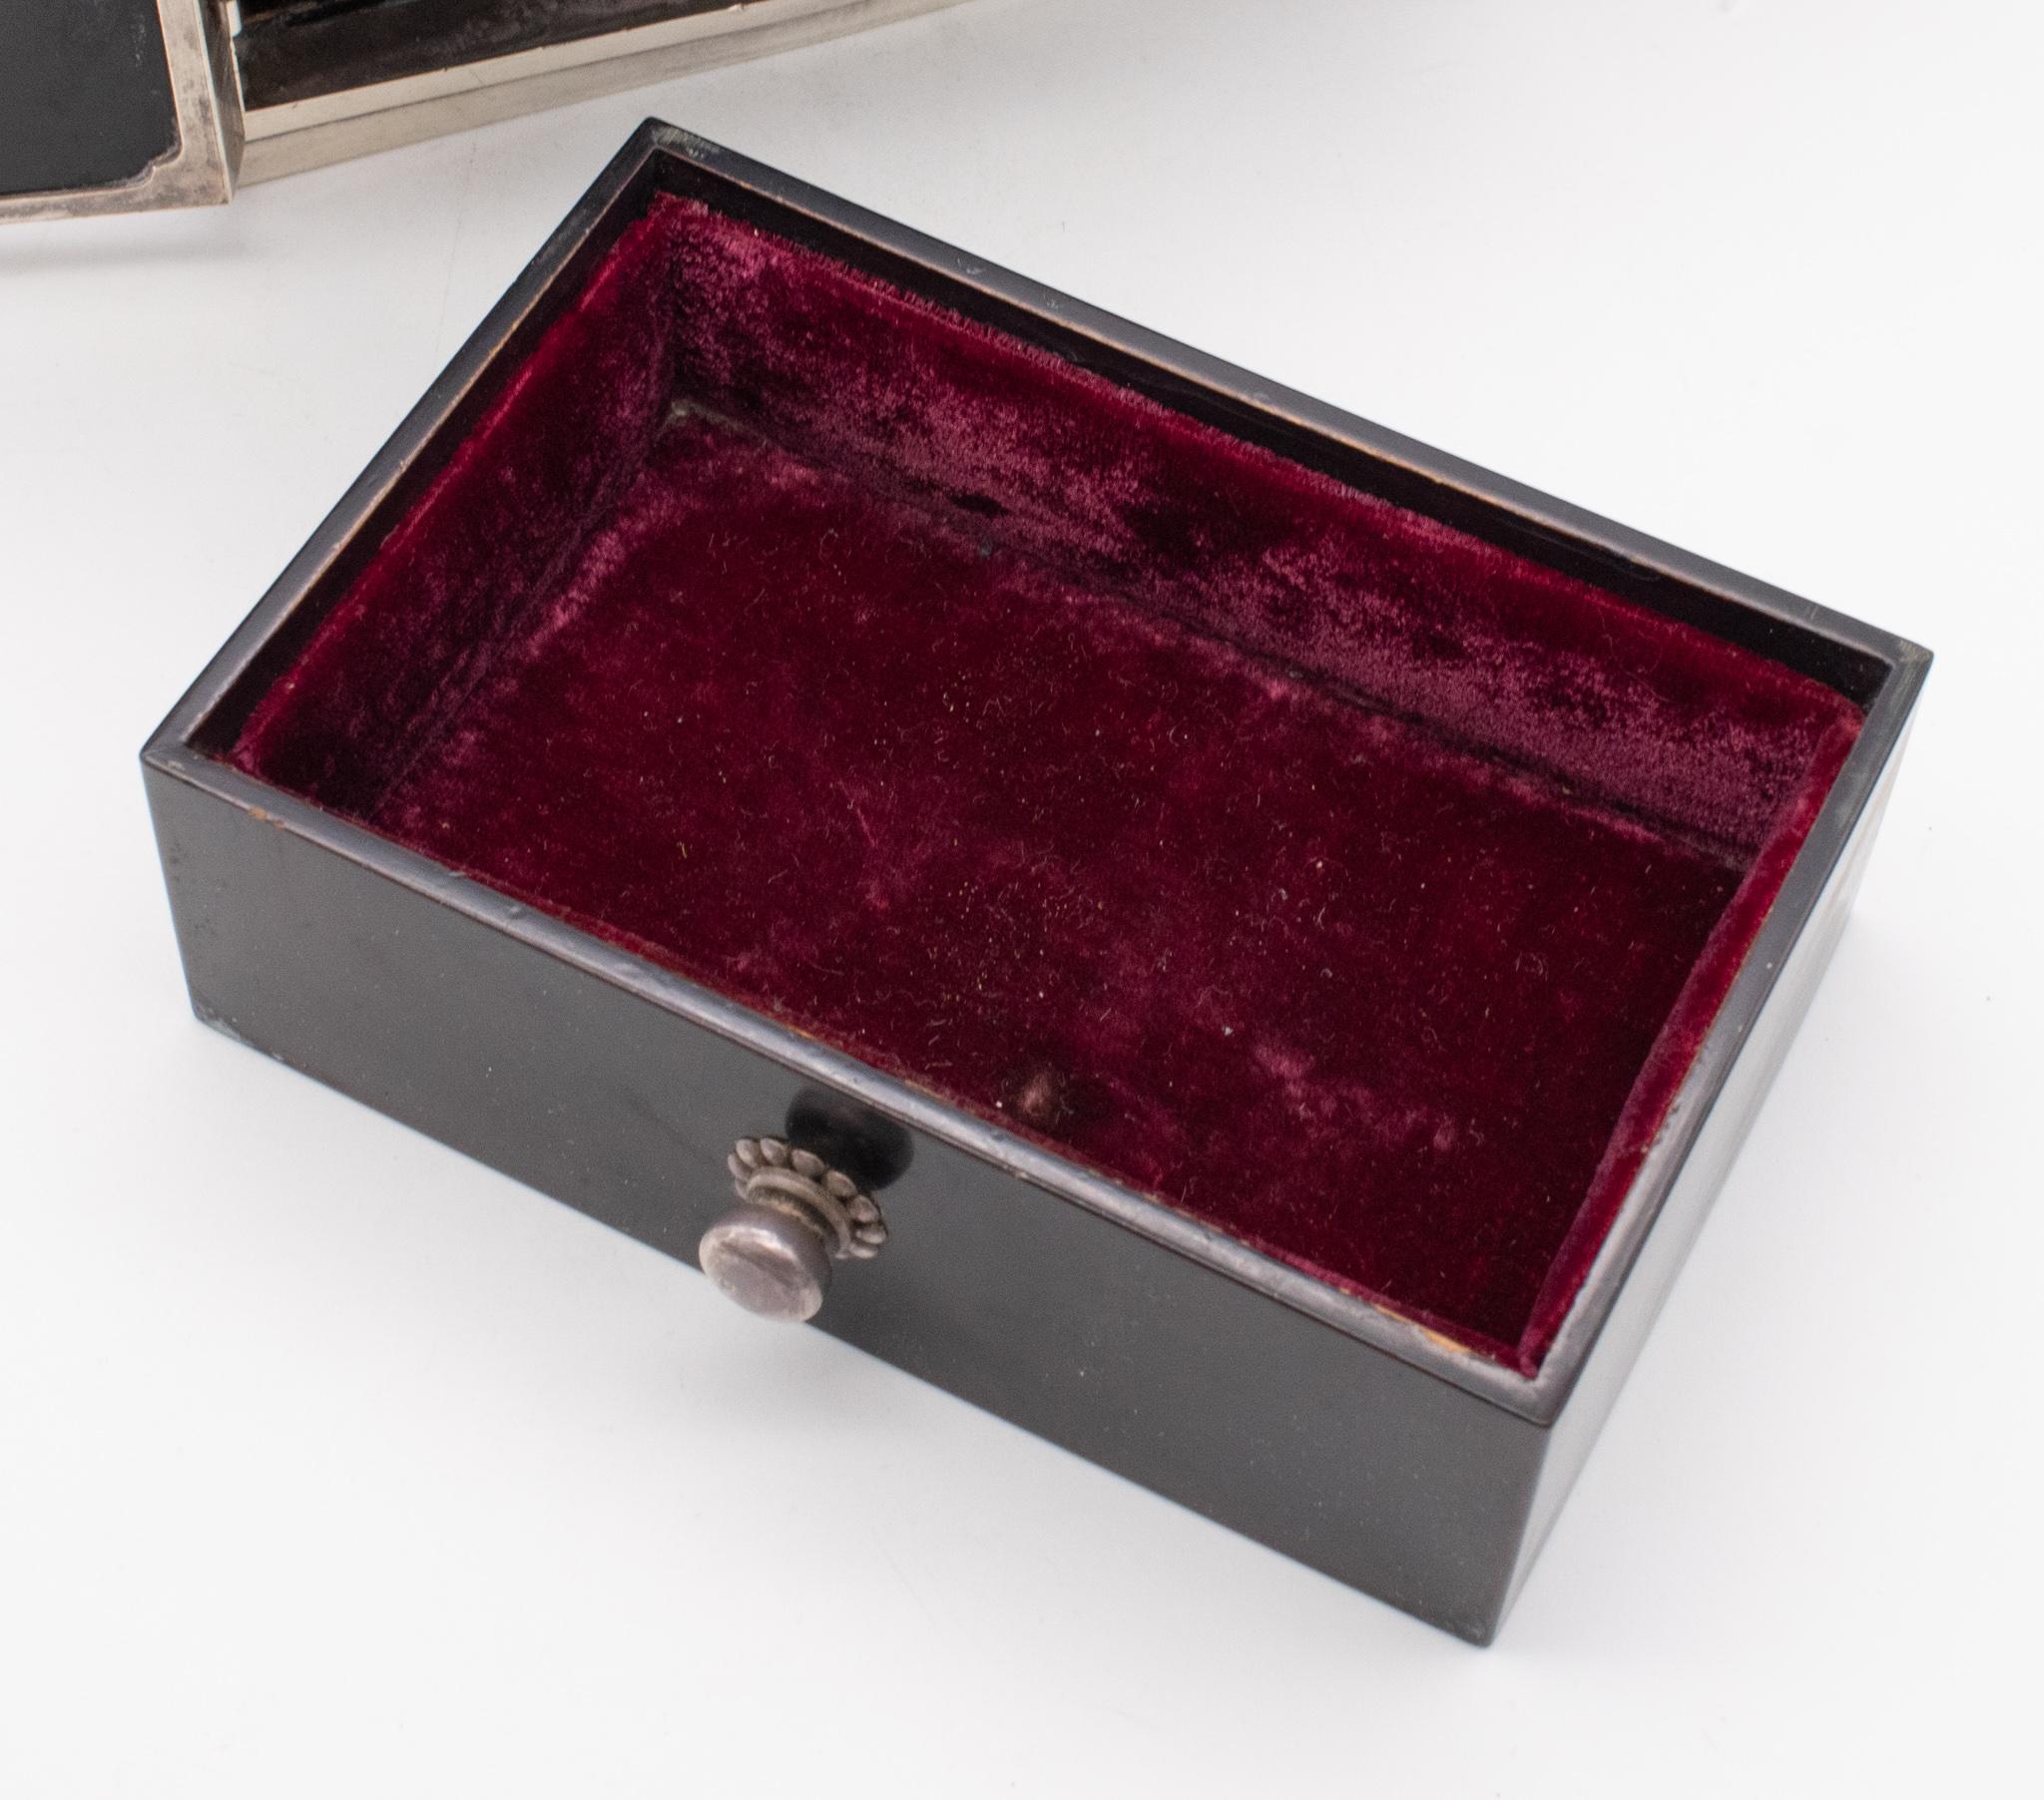 Hand-Crafted Japan Meiji Period 1868-1912 Jewel Box with Compartments Drawers Sterling Silver